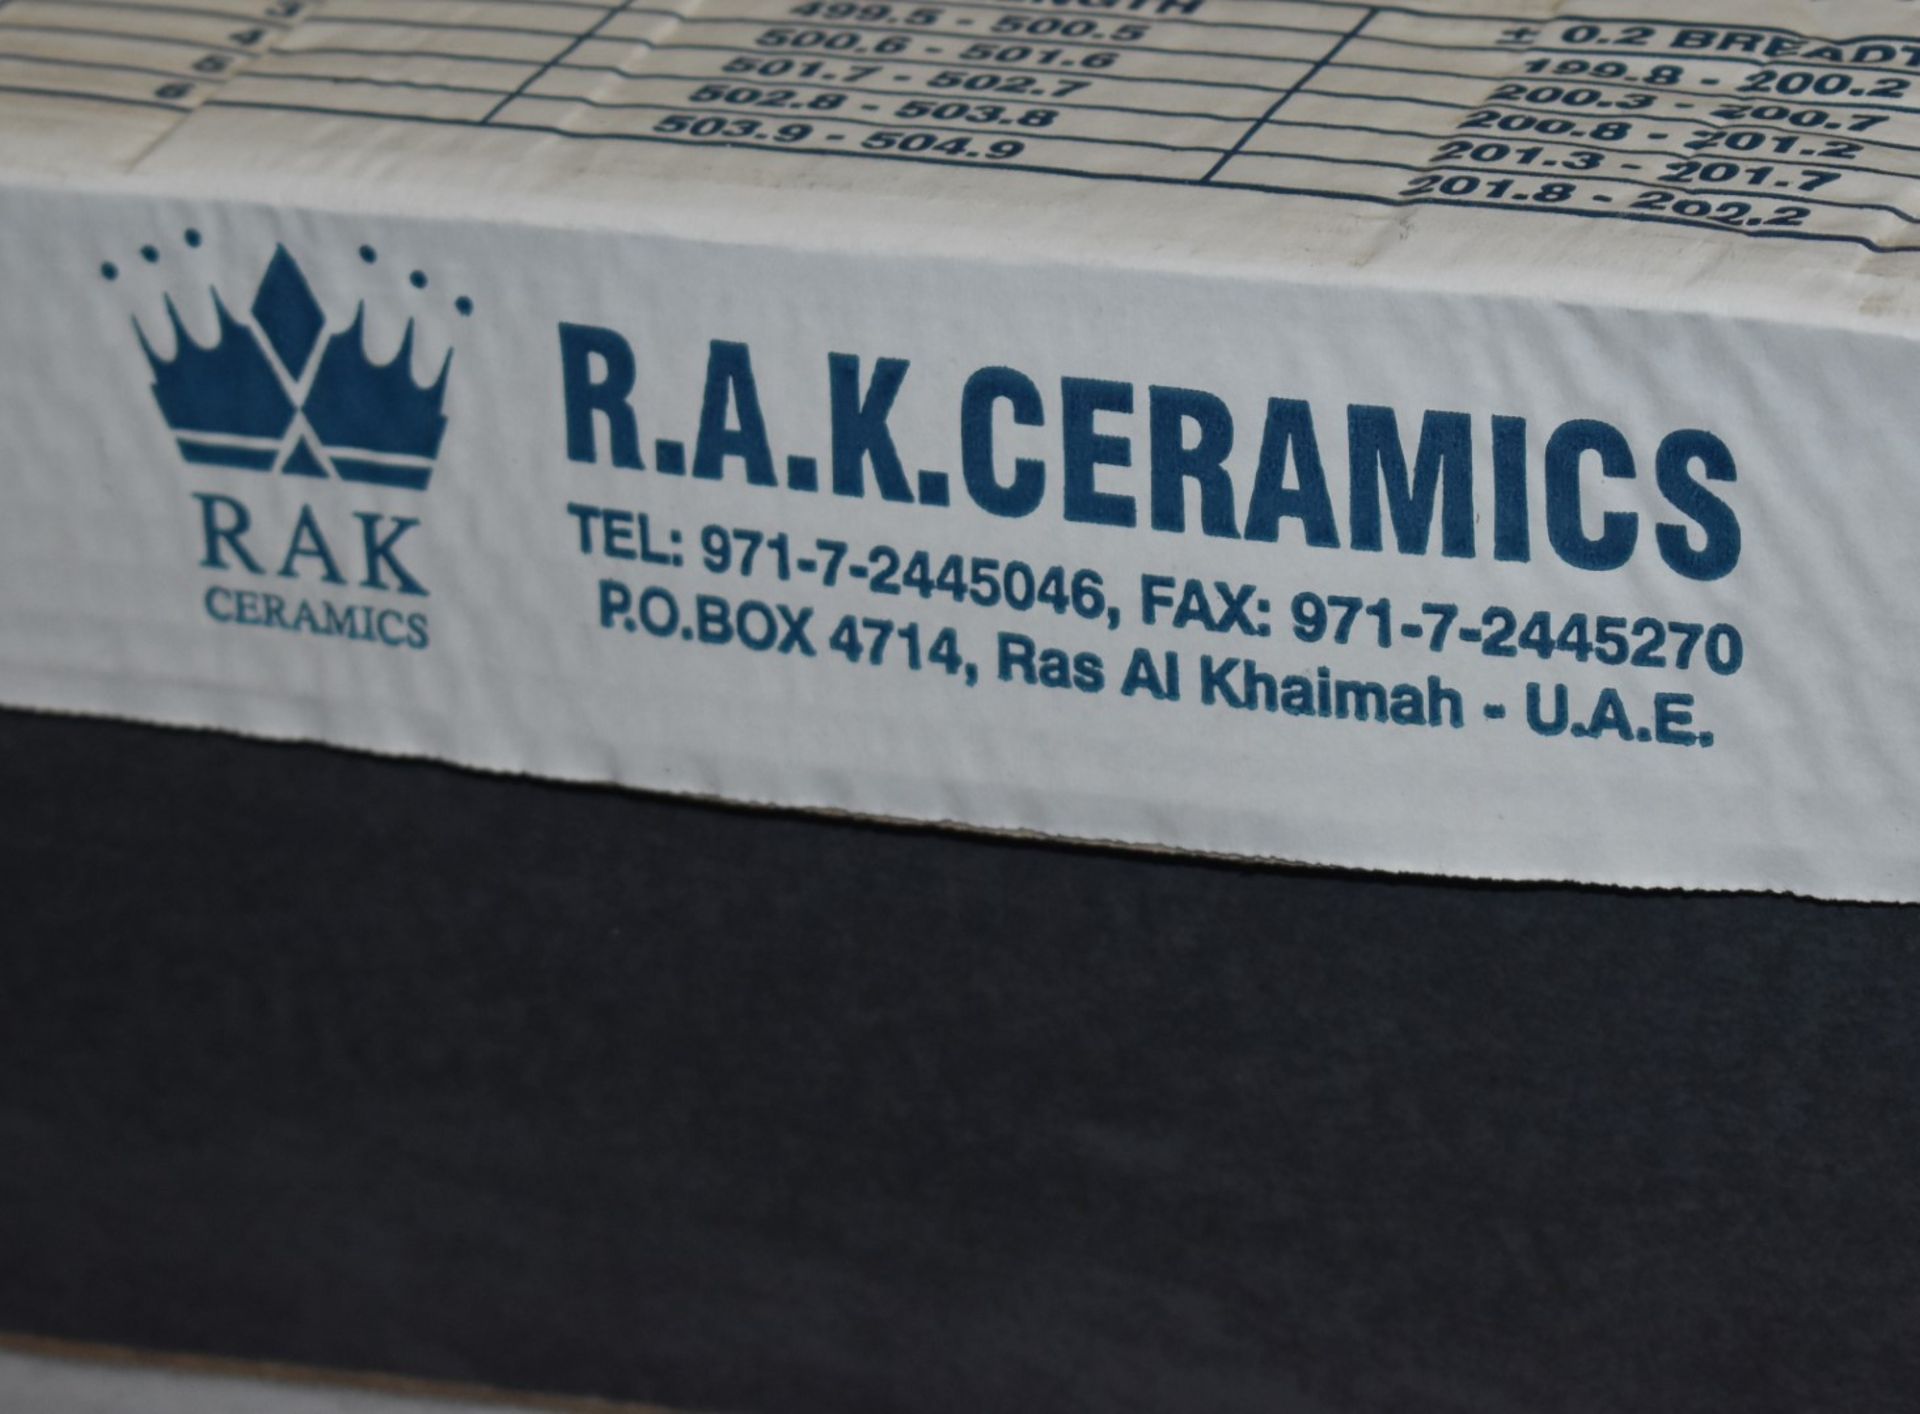 6 x Boxes of RAK Porcelain Floor or Wall Tiles - Dolomit Black - 20 x 50 cm Tiles Covering a Total - Image 8 of 9